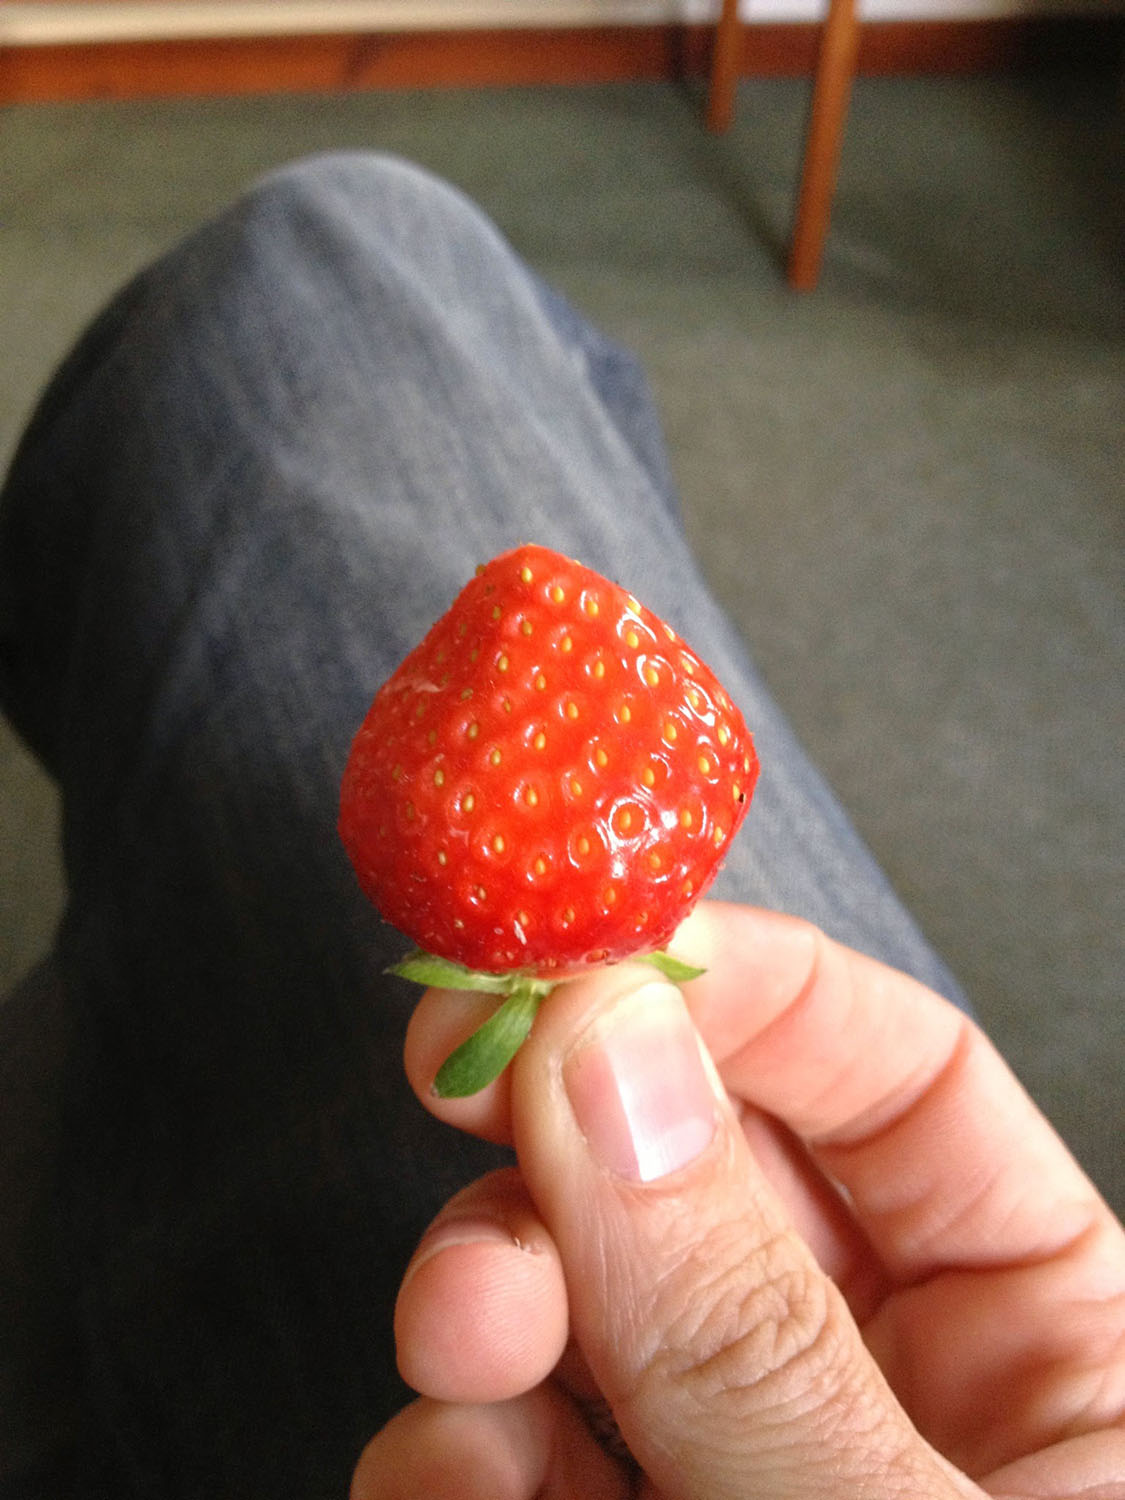 Strawberry raised by the monks of Pluscarden Abbey